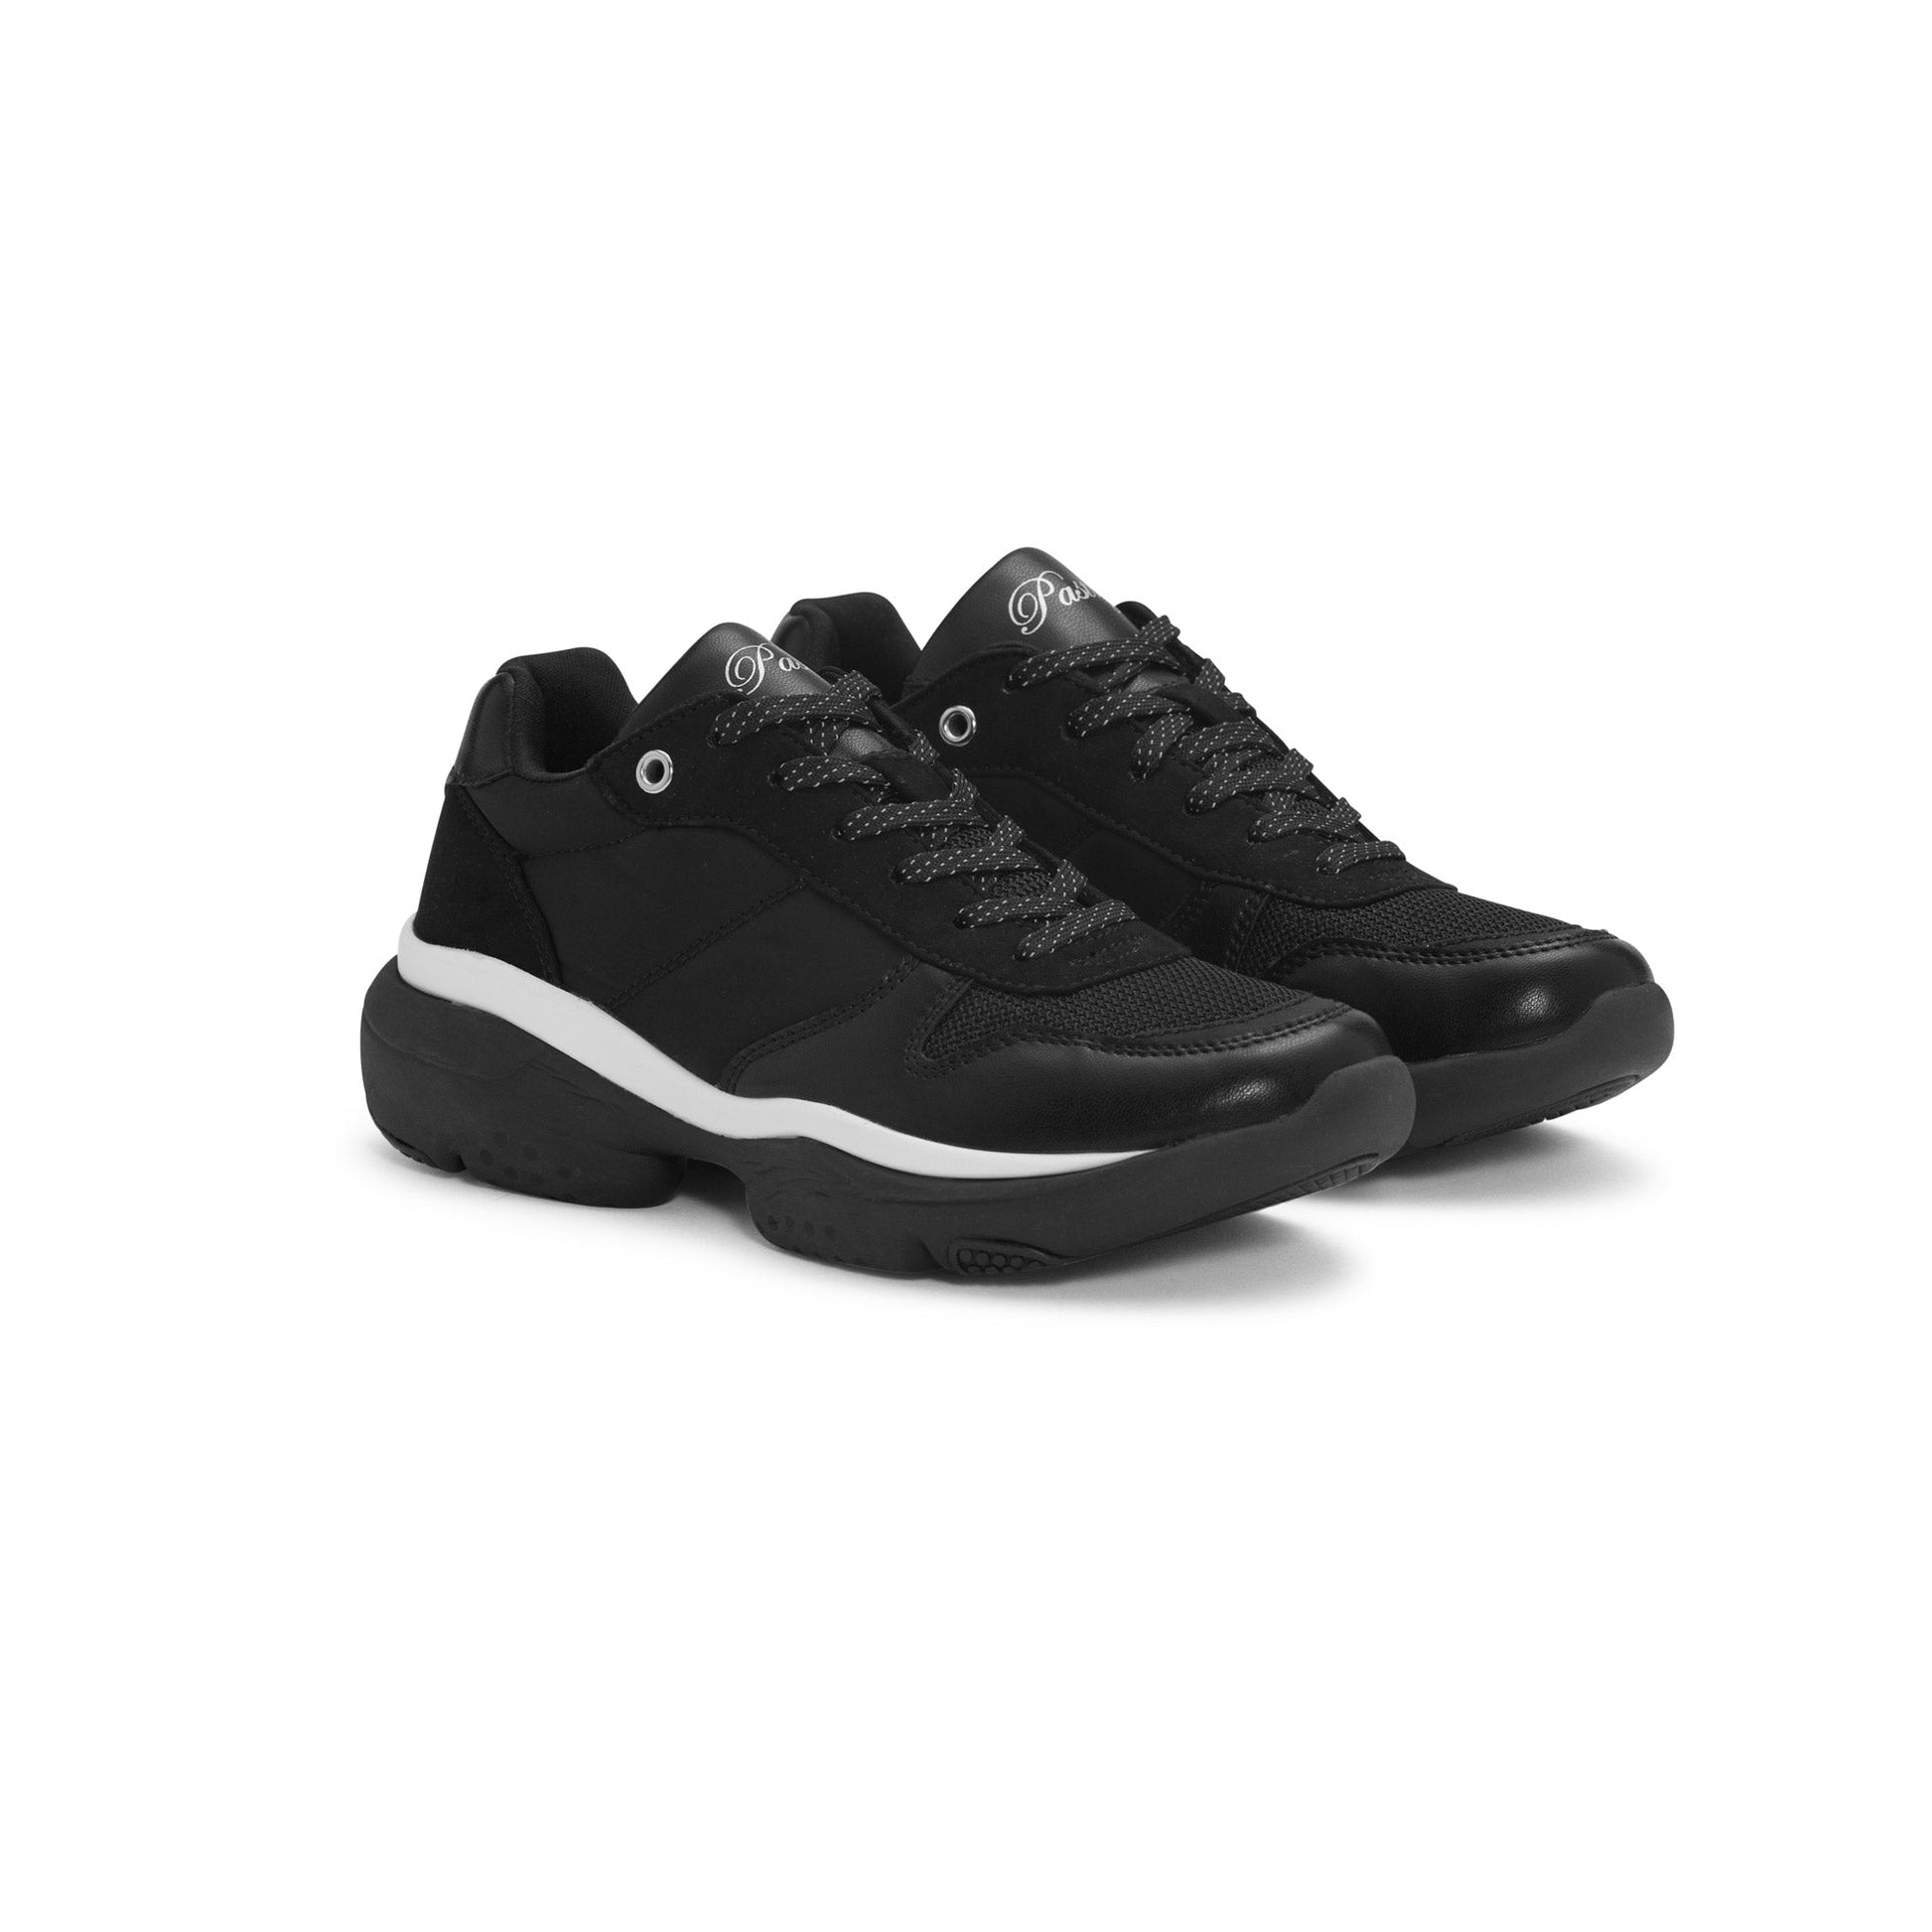 Pair of Pastry Adult Women's Carla Sneaker in Black/White in 3 quarter view